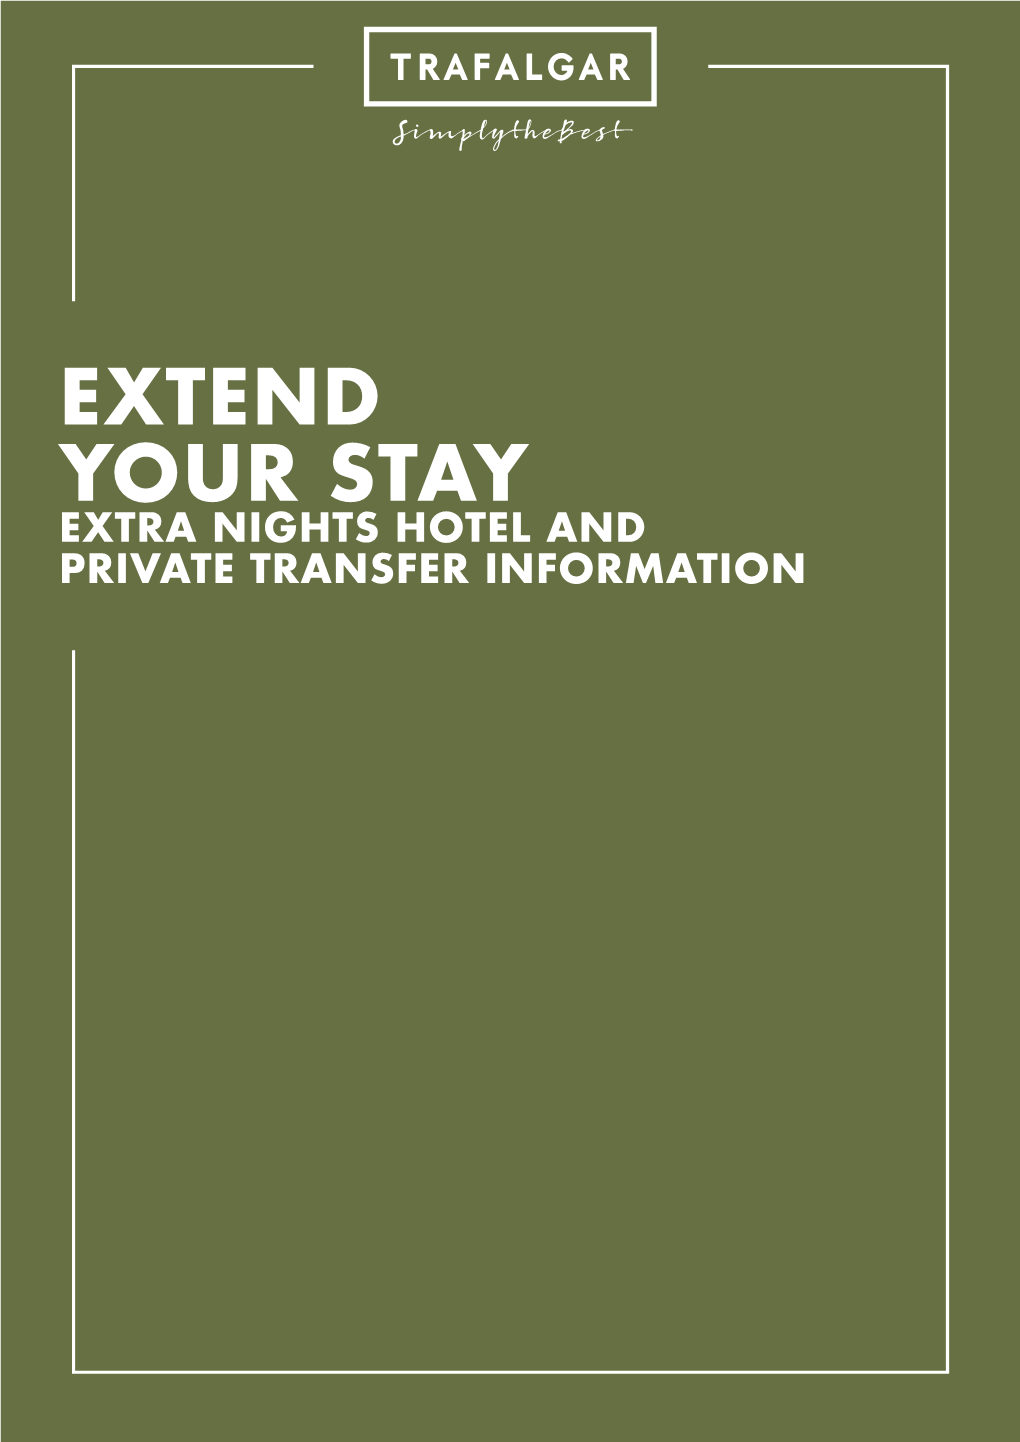 EXTEND YOUR STAY EXTRA NIGHTS HOTEL and PRIVATE TRANSFER INFORMATION Extend Your Stay in Europe